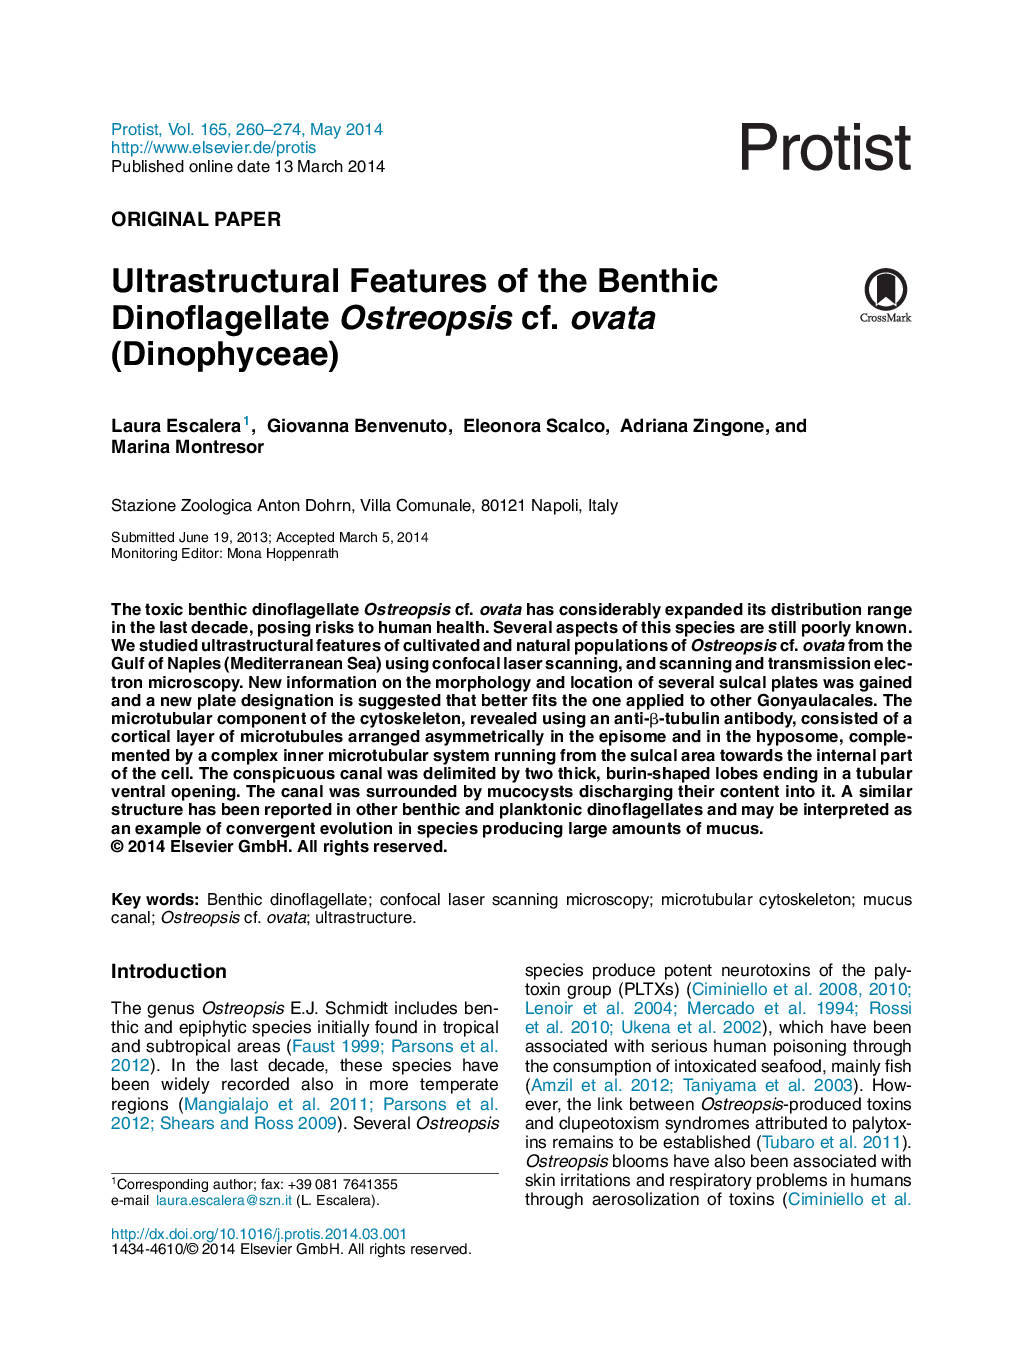 Ultrastructural Features of the Benthic Dinoflagellate Ostreopsis cf. ovata (Dinophyceae)